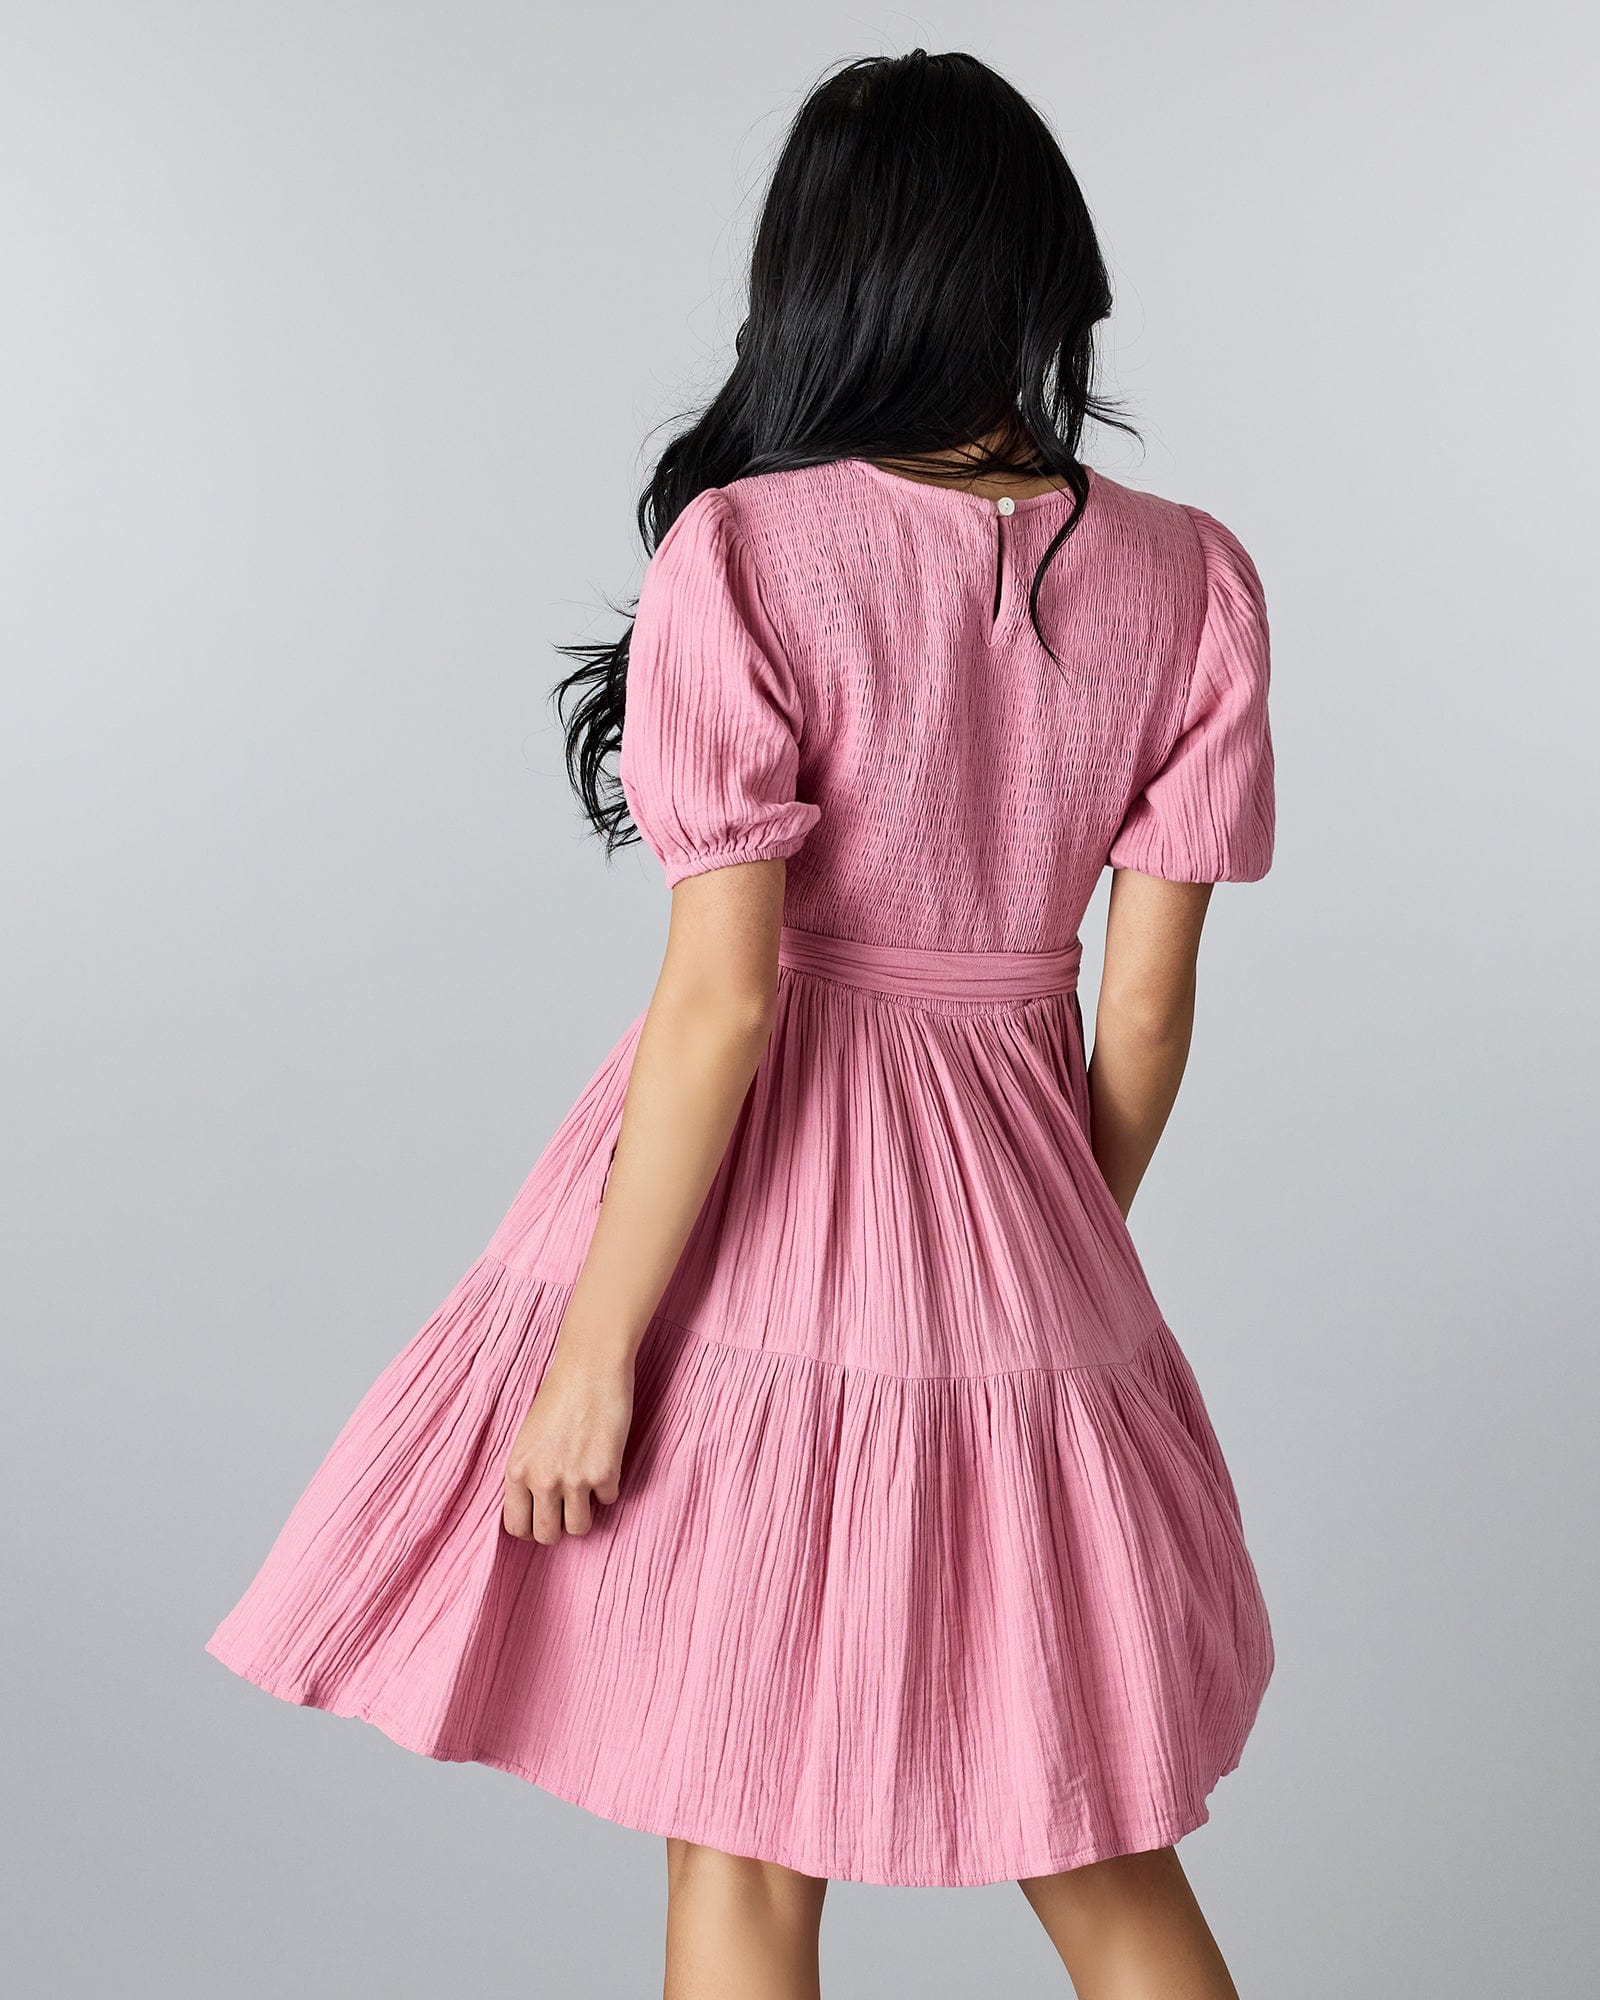 Woman in a pink, short sleeved, knee-length dress with smocking on bodice and a tie at the waist.